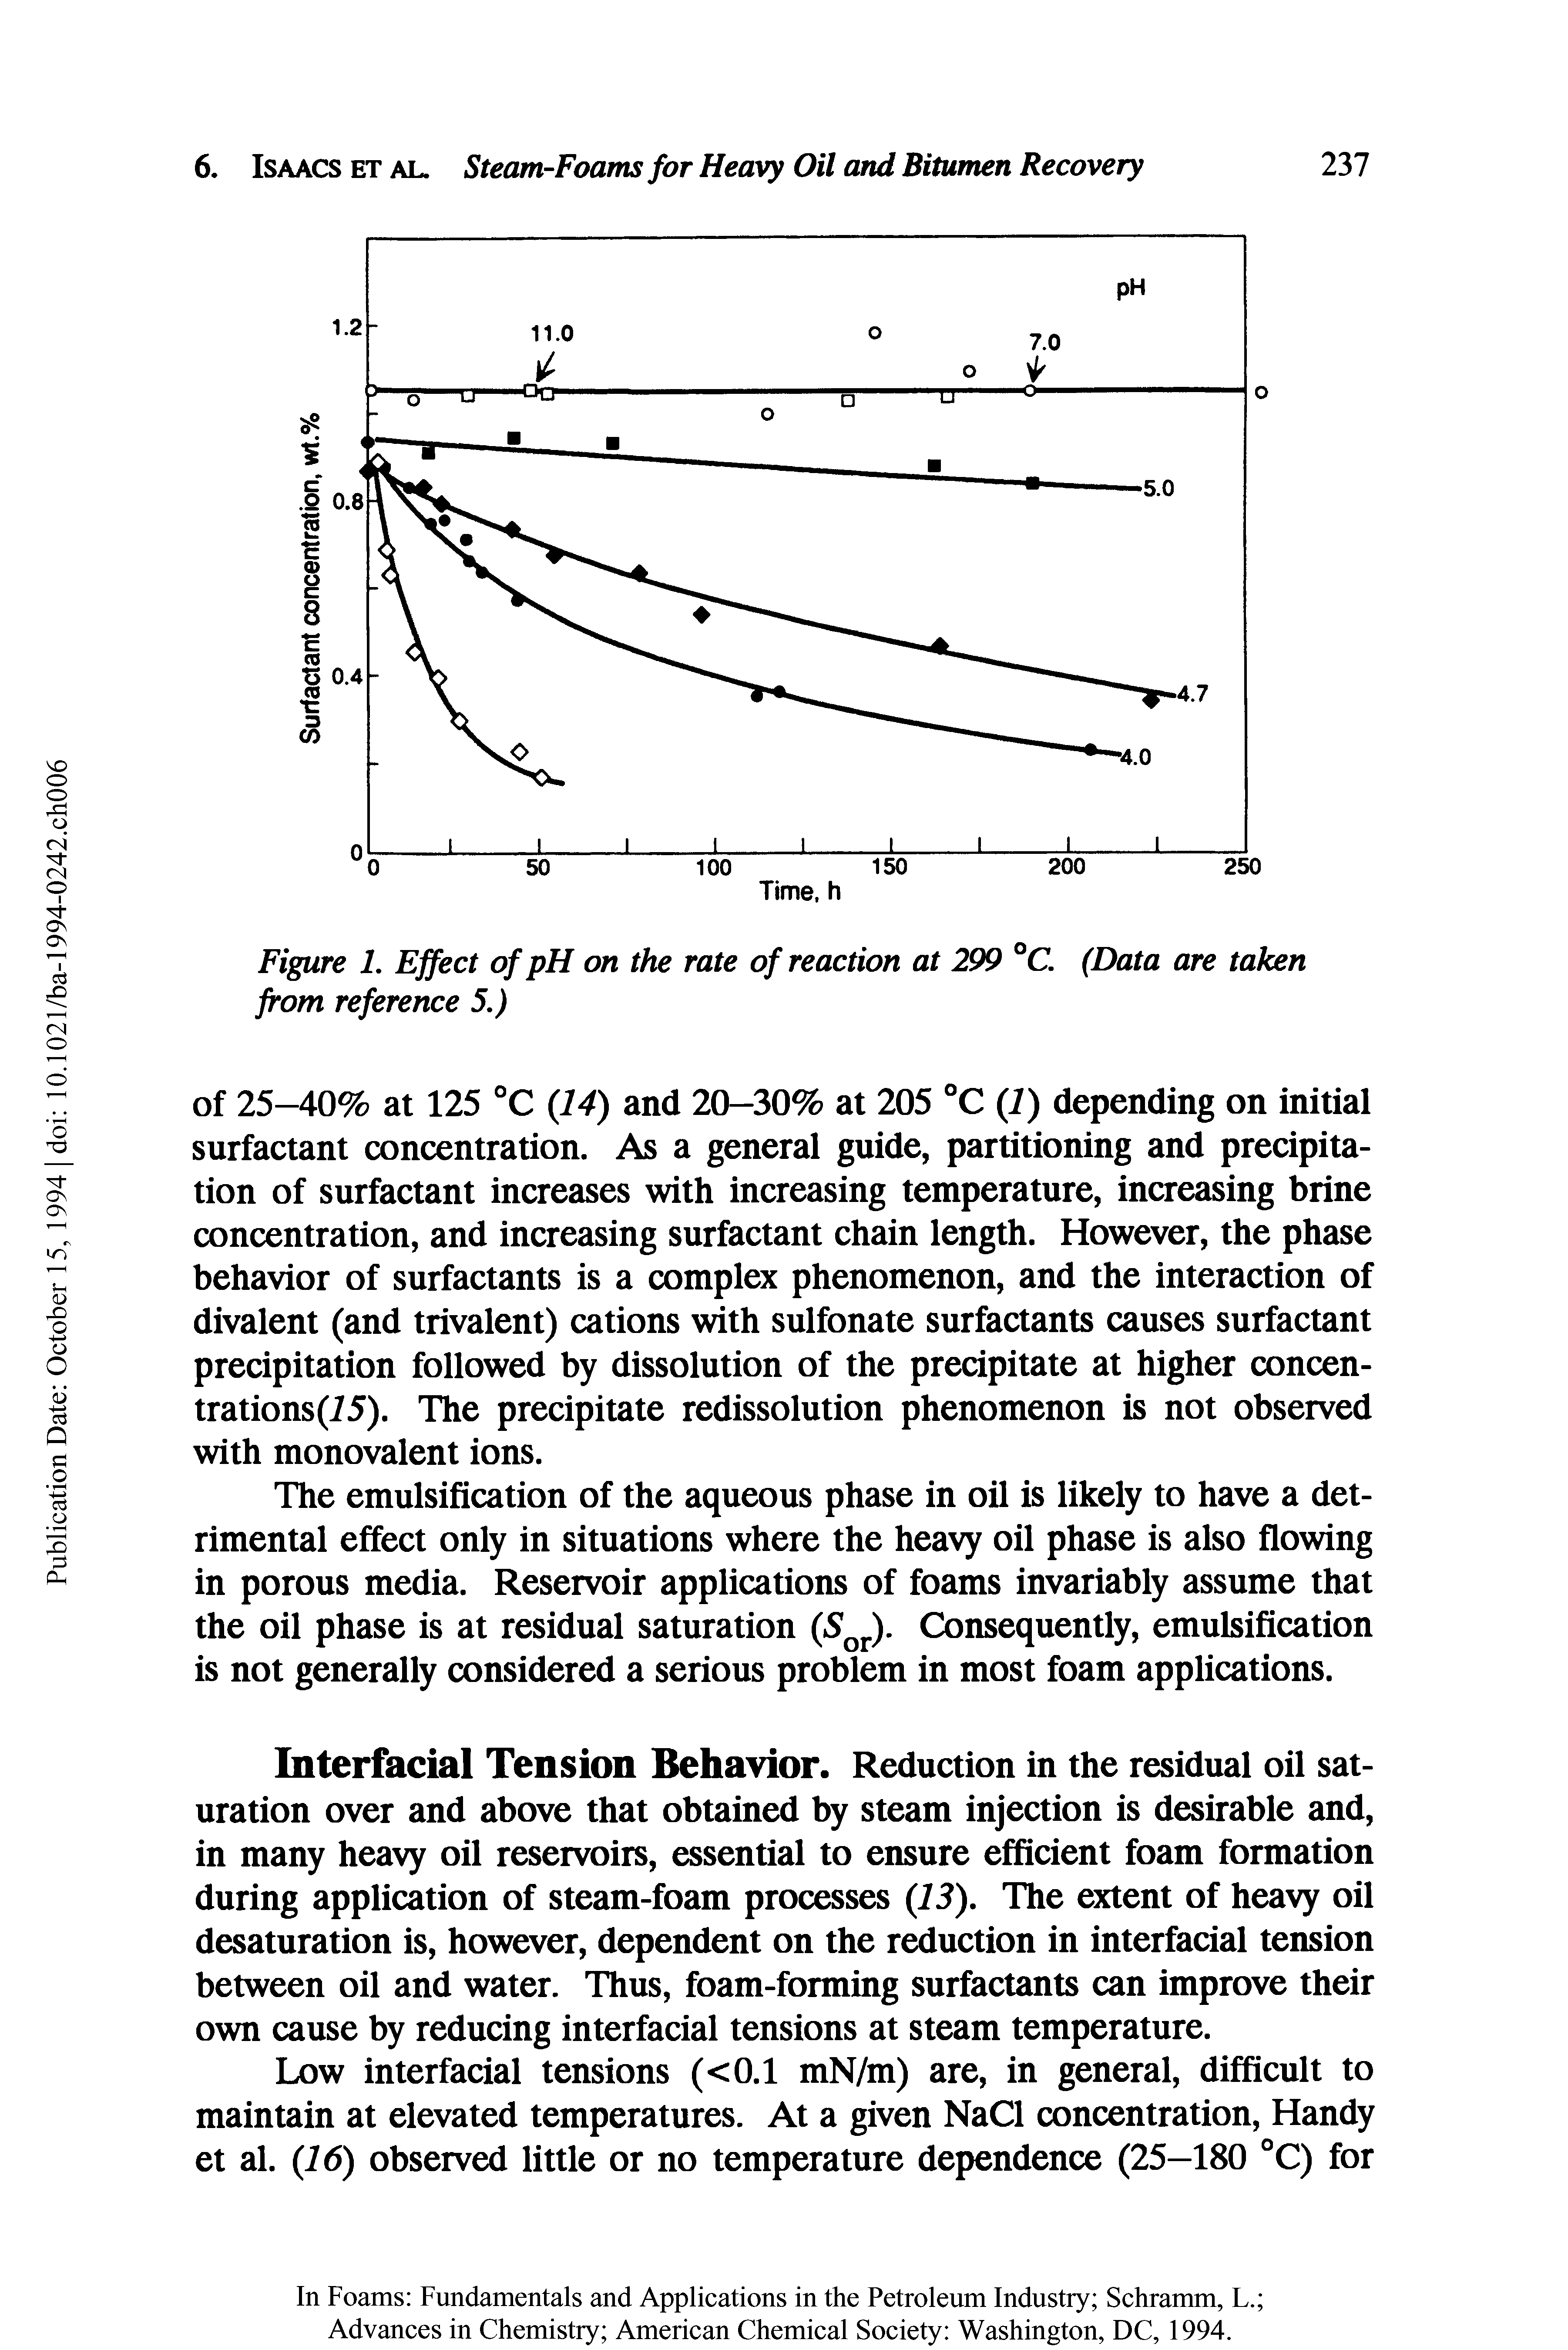 Figure 1. Effect of pH on the rate of reaction at 299 °C. (Data are taken from reference 5.)...